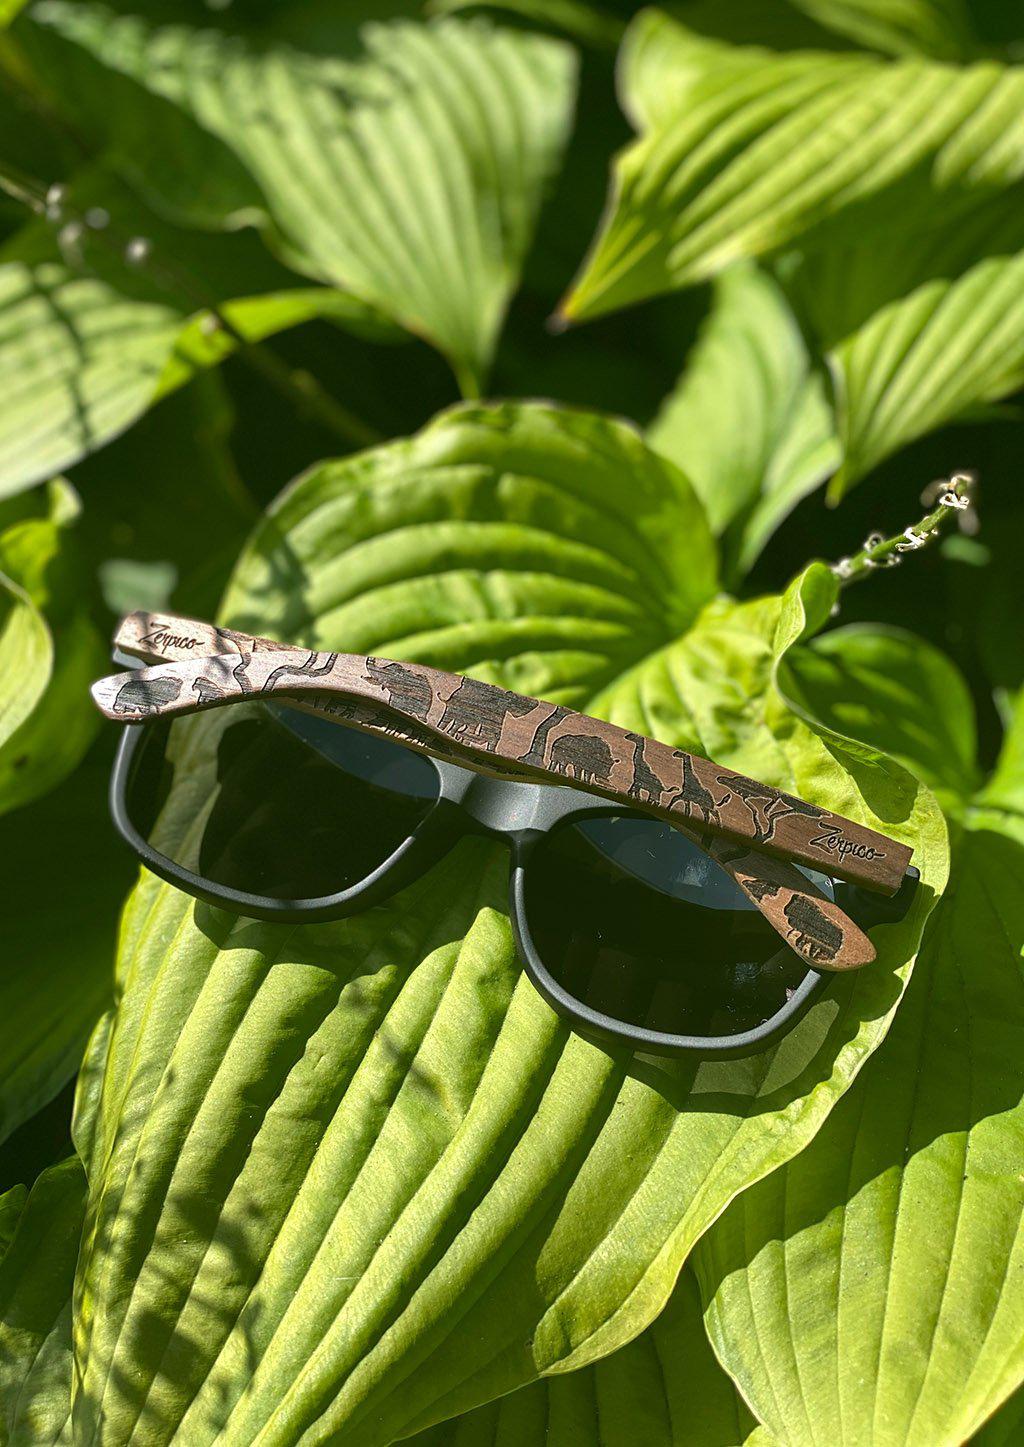 Engraved wooden sunglasses Inspired by the open plains and animals of the African savanna. Outside where it belongs among the green outdoors.